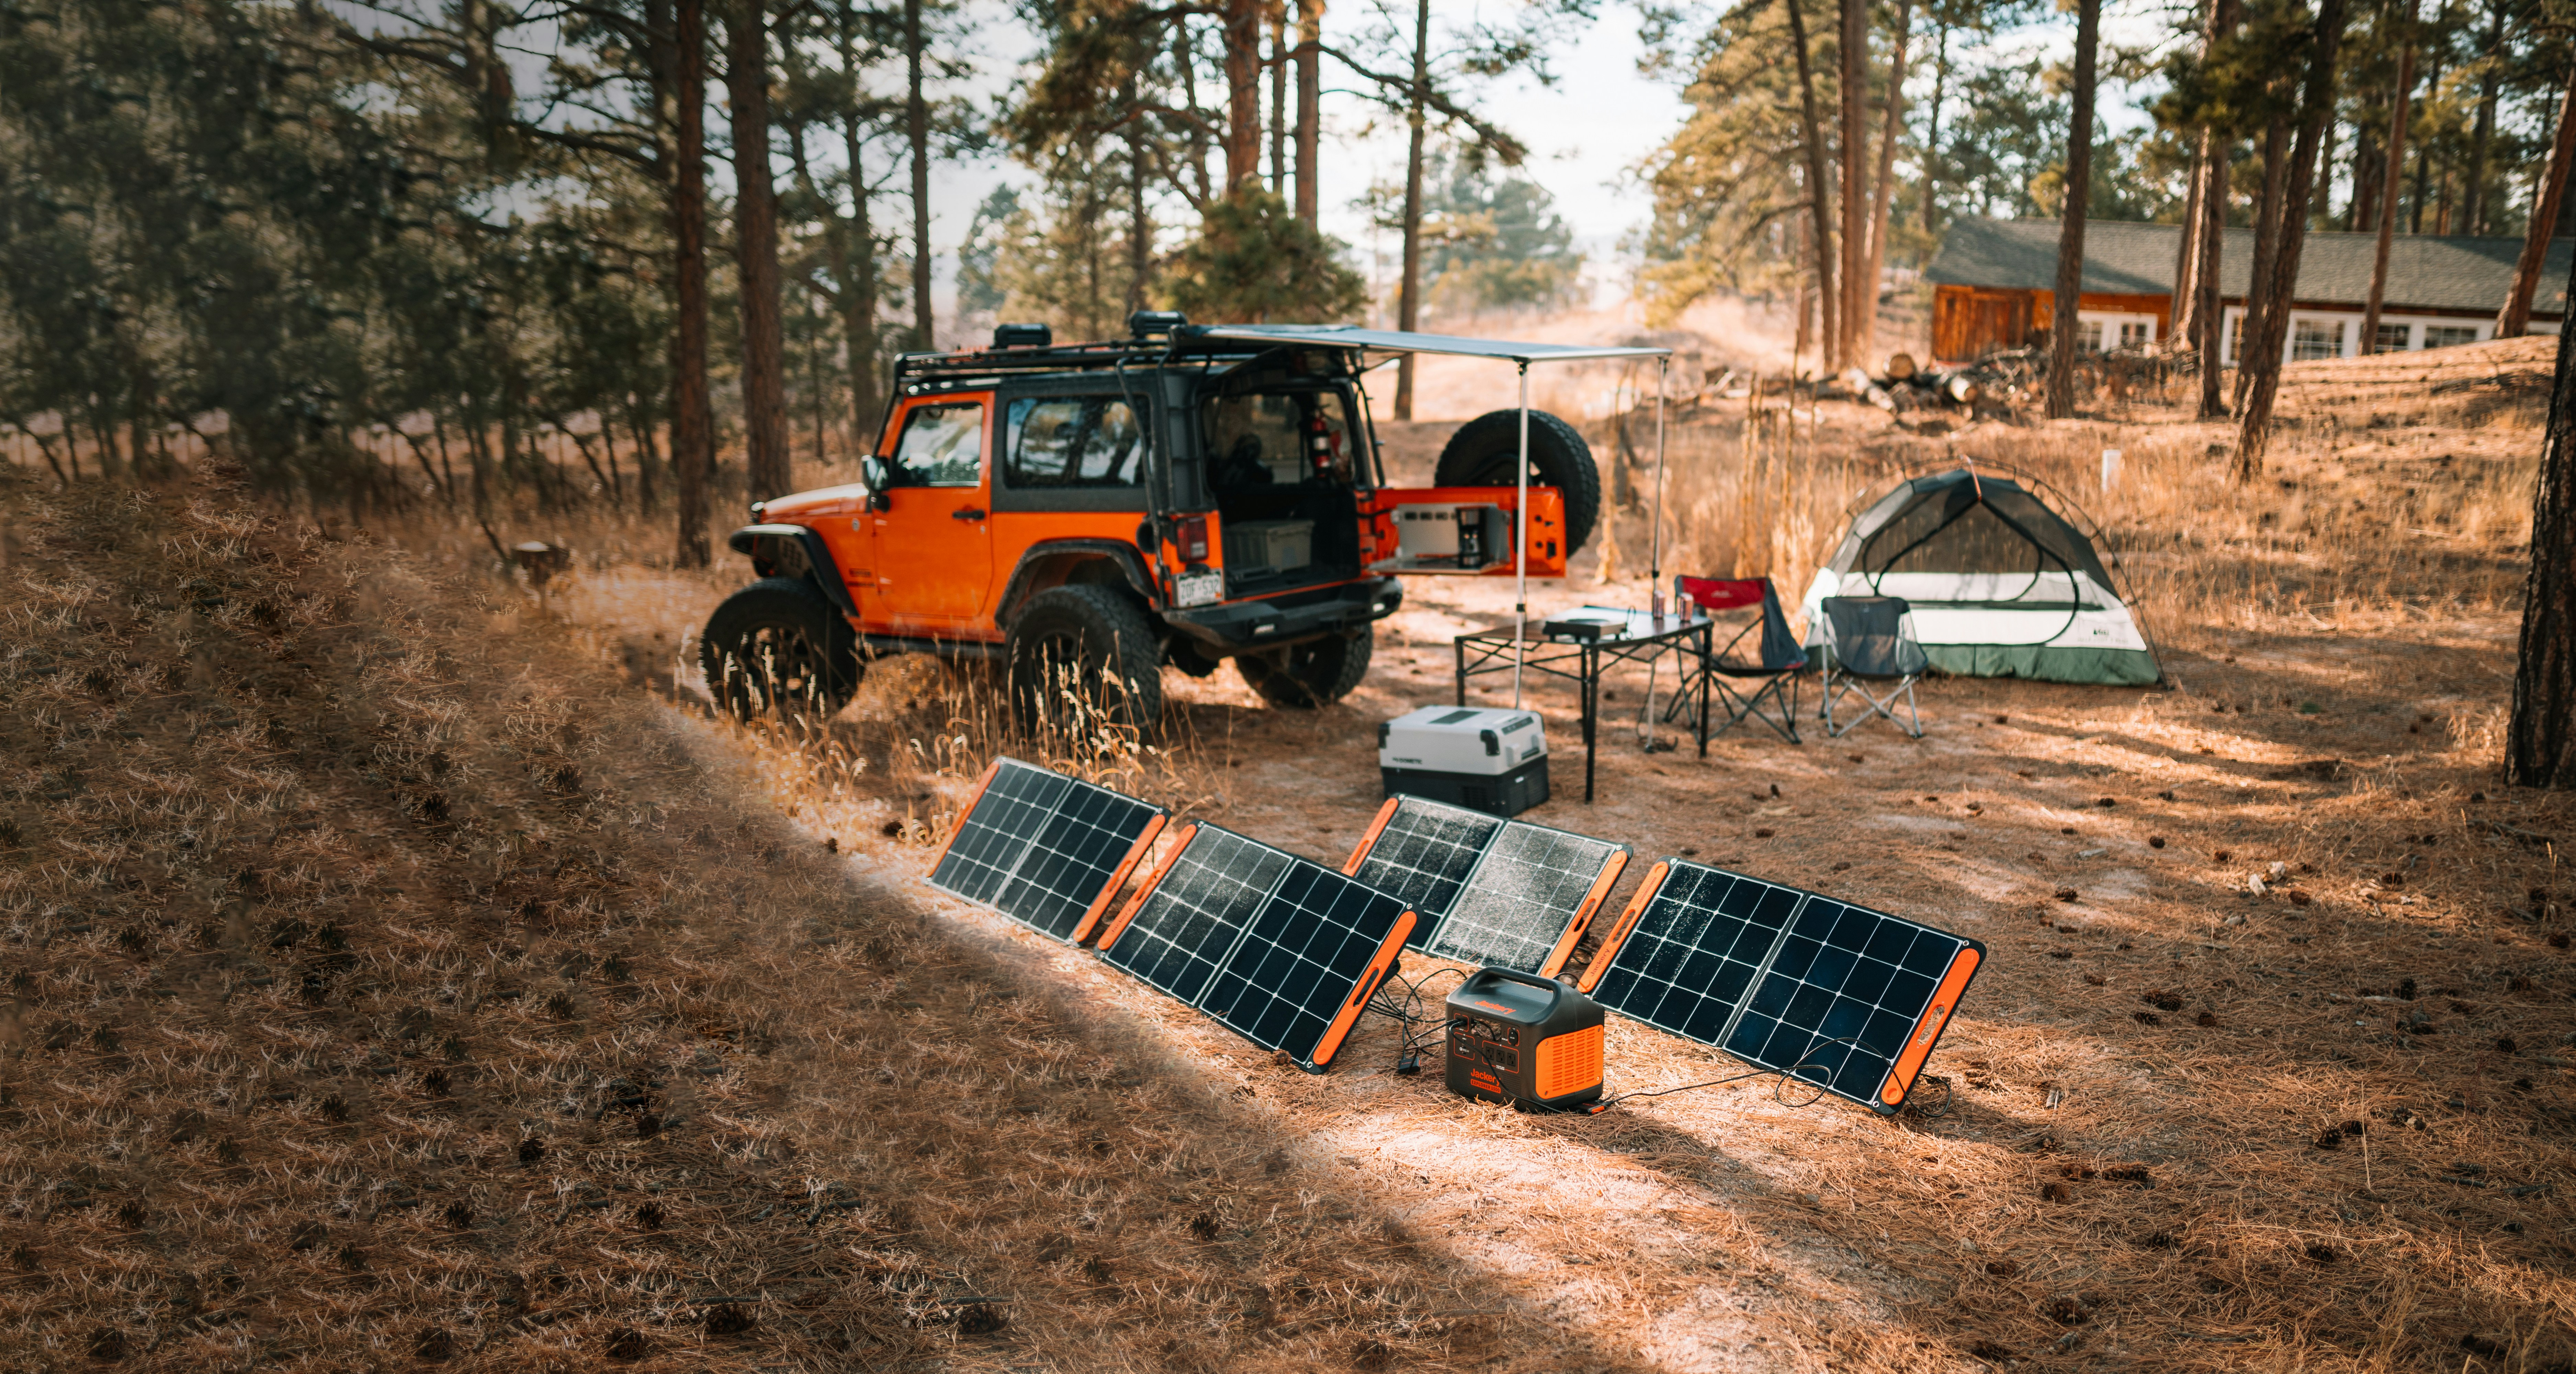 The Jackery 1000 power station charging via solar panels in an open field